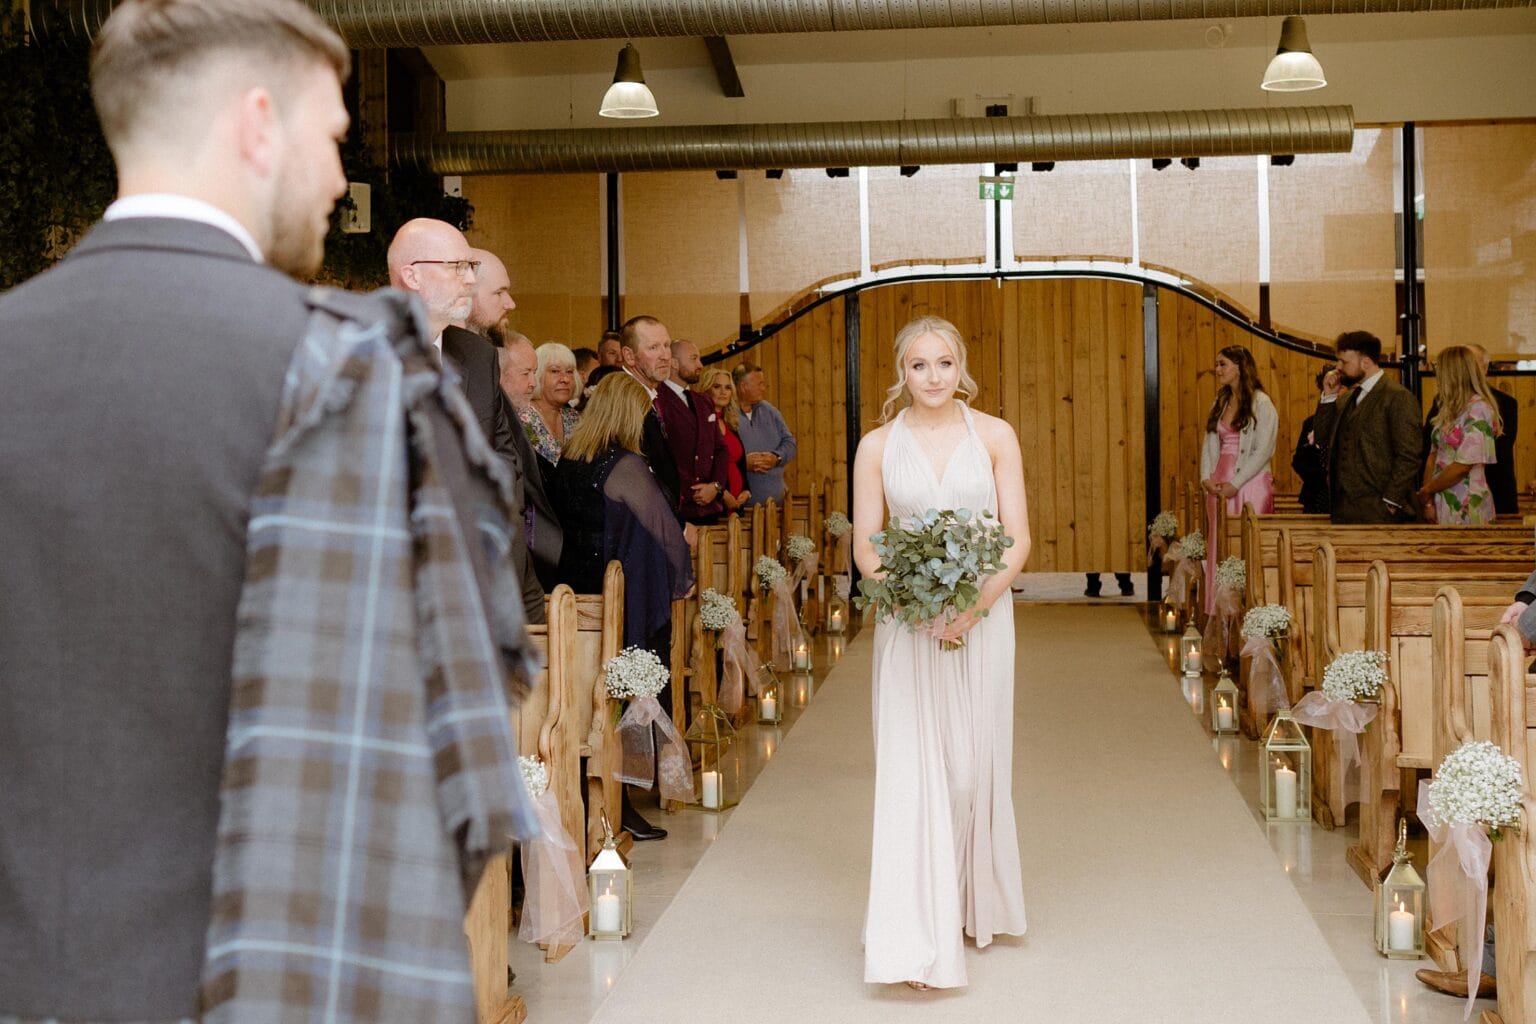 guests stand and watch as a bridesmaid wearing a long pink dress and carrying a greenery bouquet walks down the aisle at barn wedding venues west lothian scotland